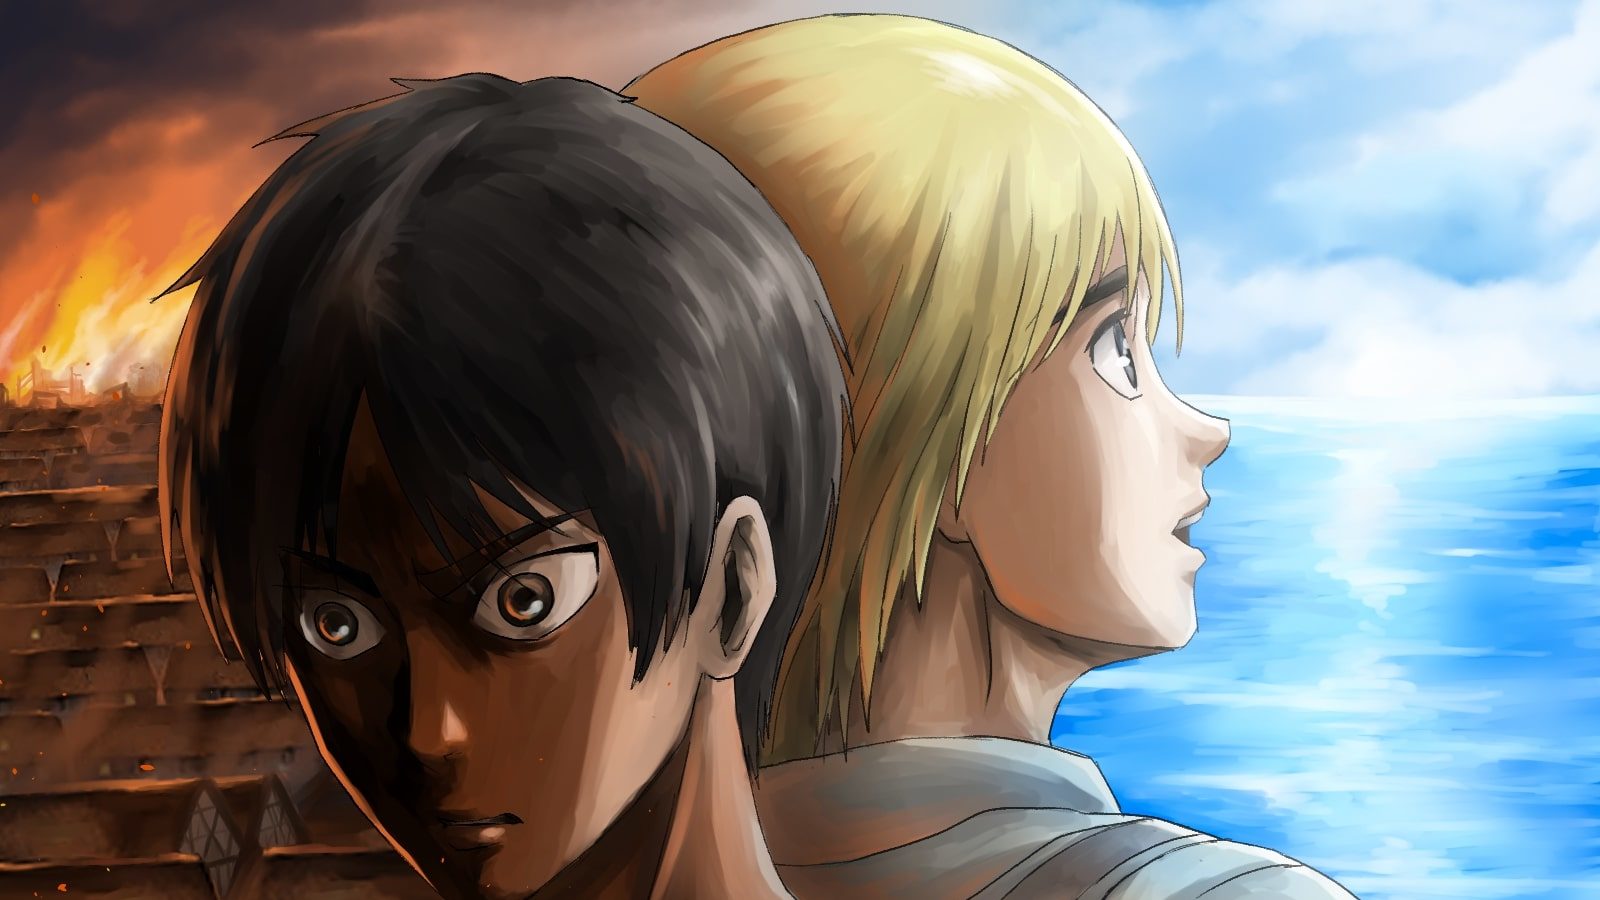 Attack on Titan Chapter 137 Spoilers Predictions: Eren explains Armin the Reason for Rumbling